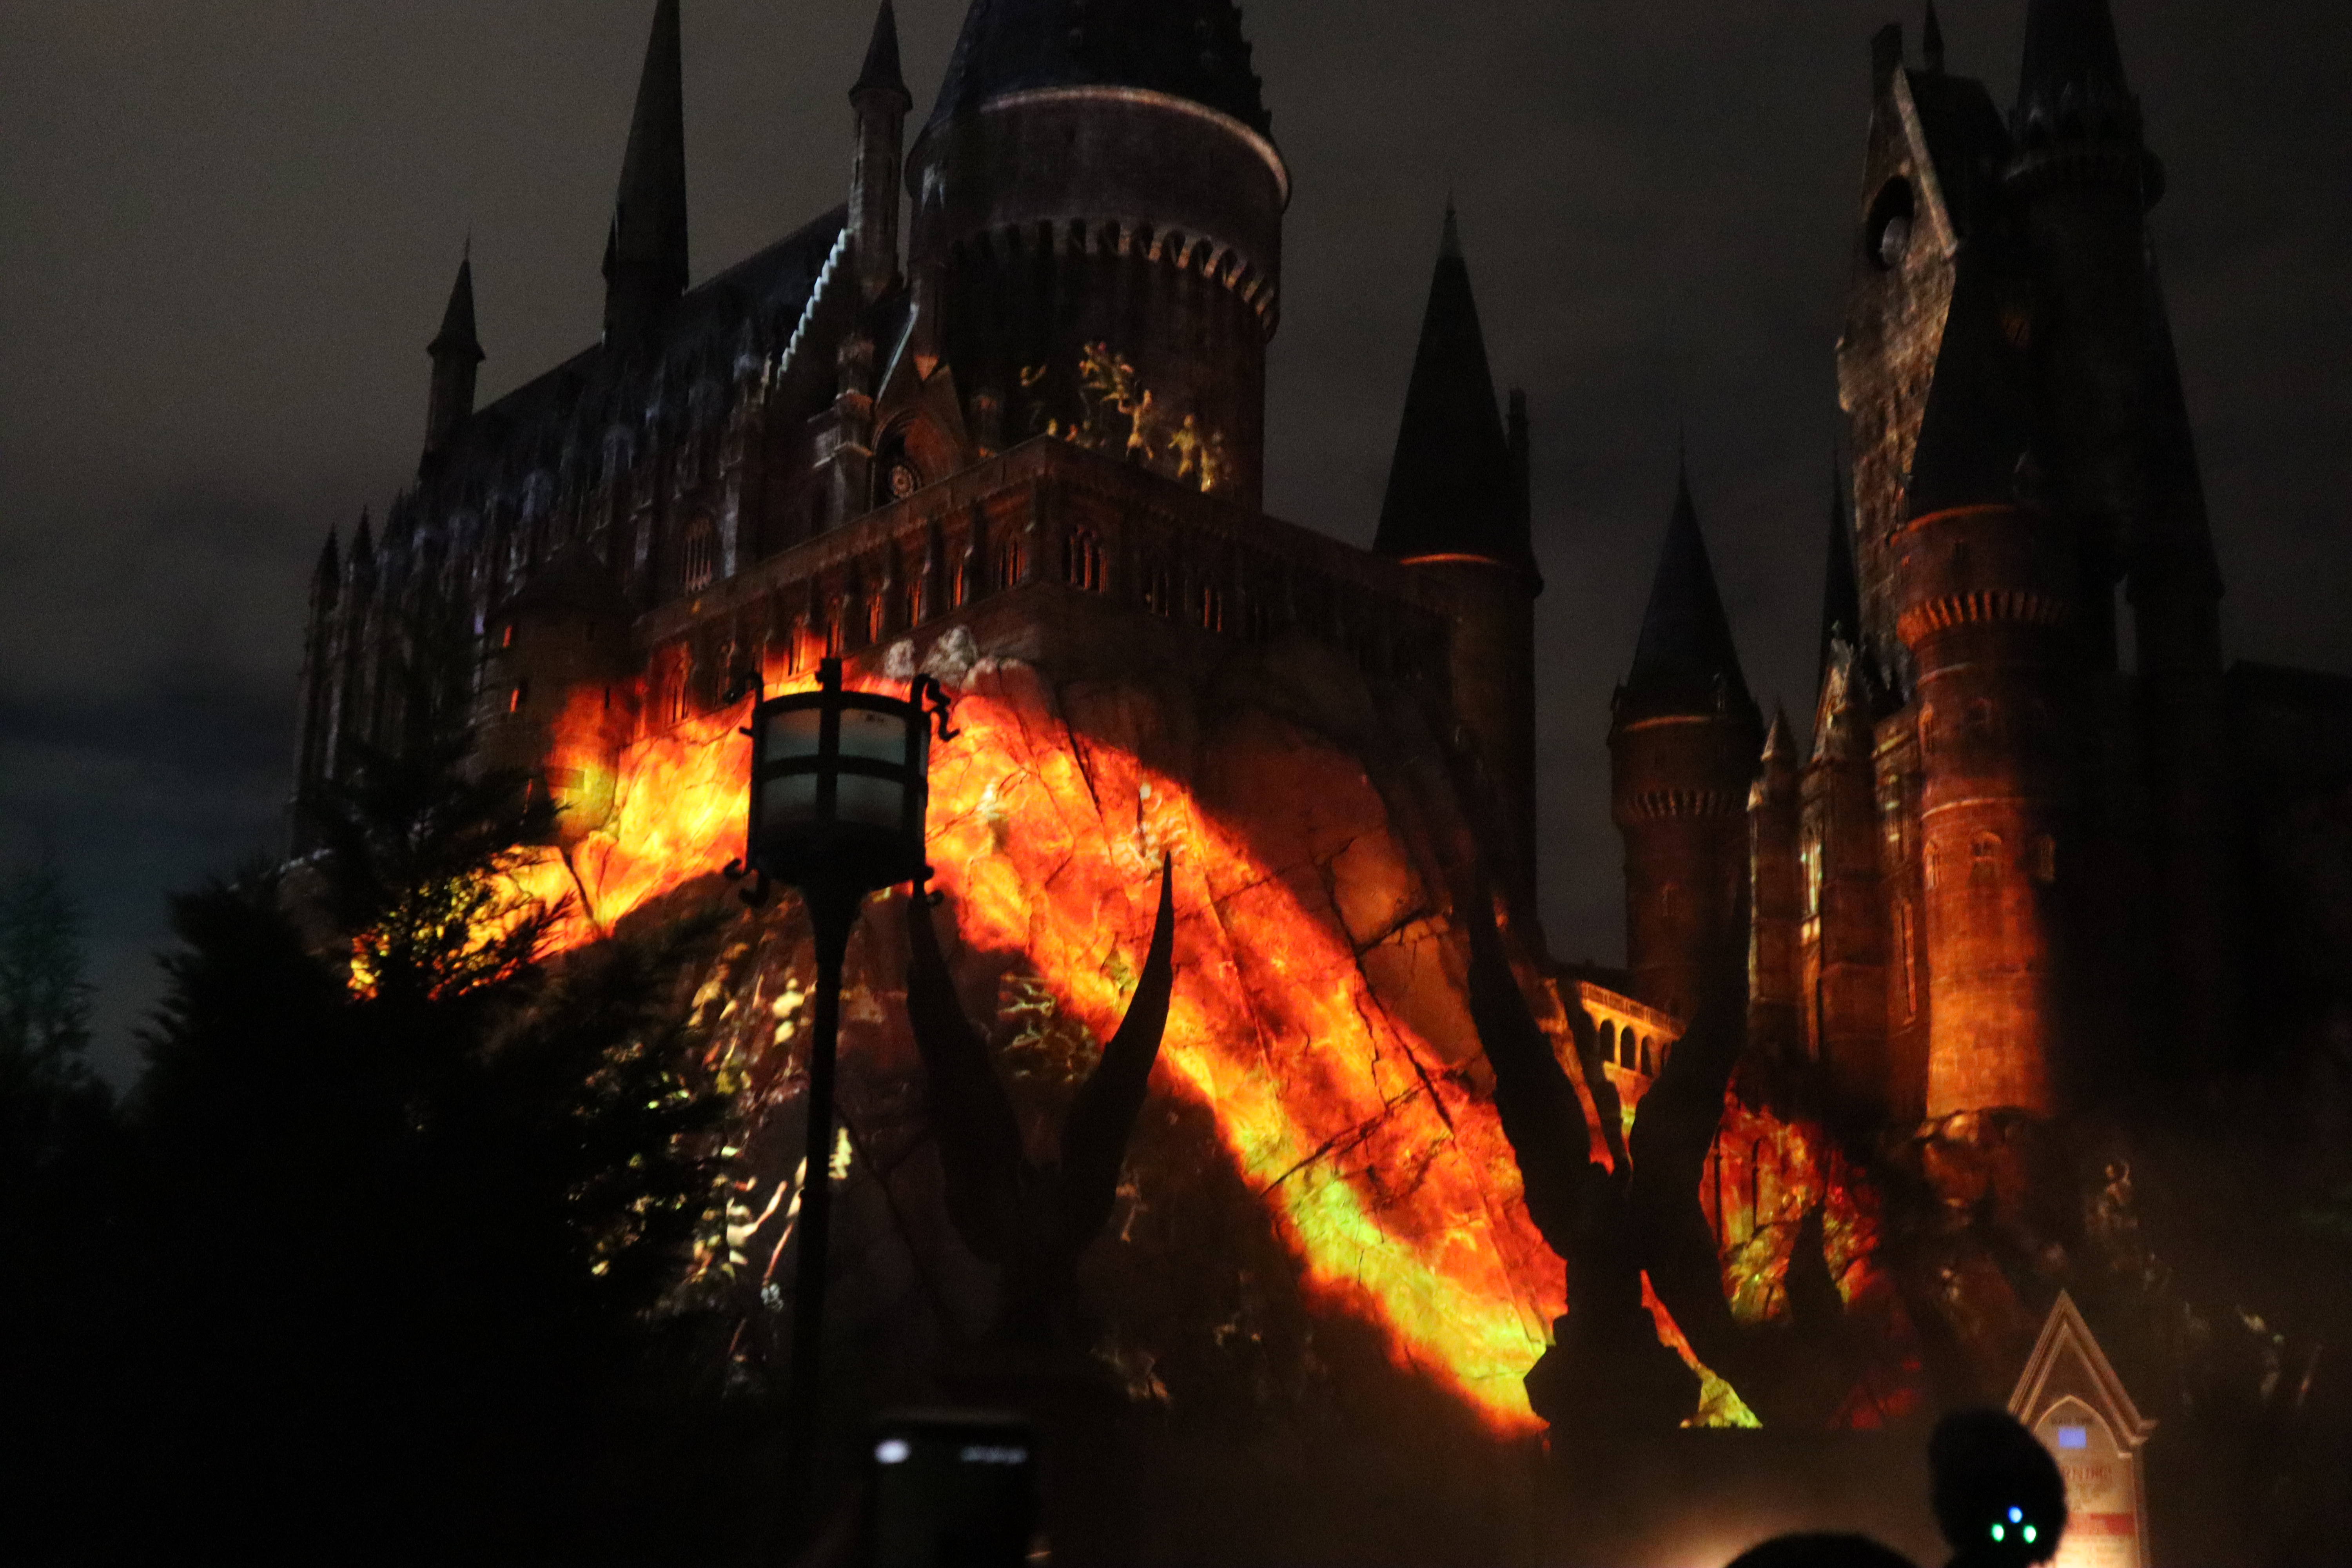 Inferi create a fiery wall up the sides of the castle in “Dark Arts at Hogwarts Castle.”